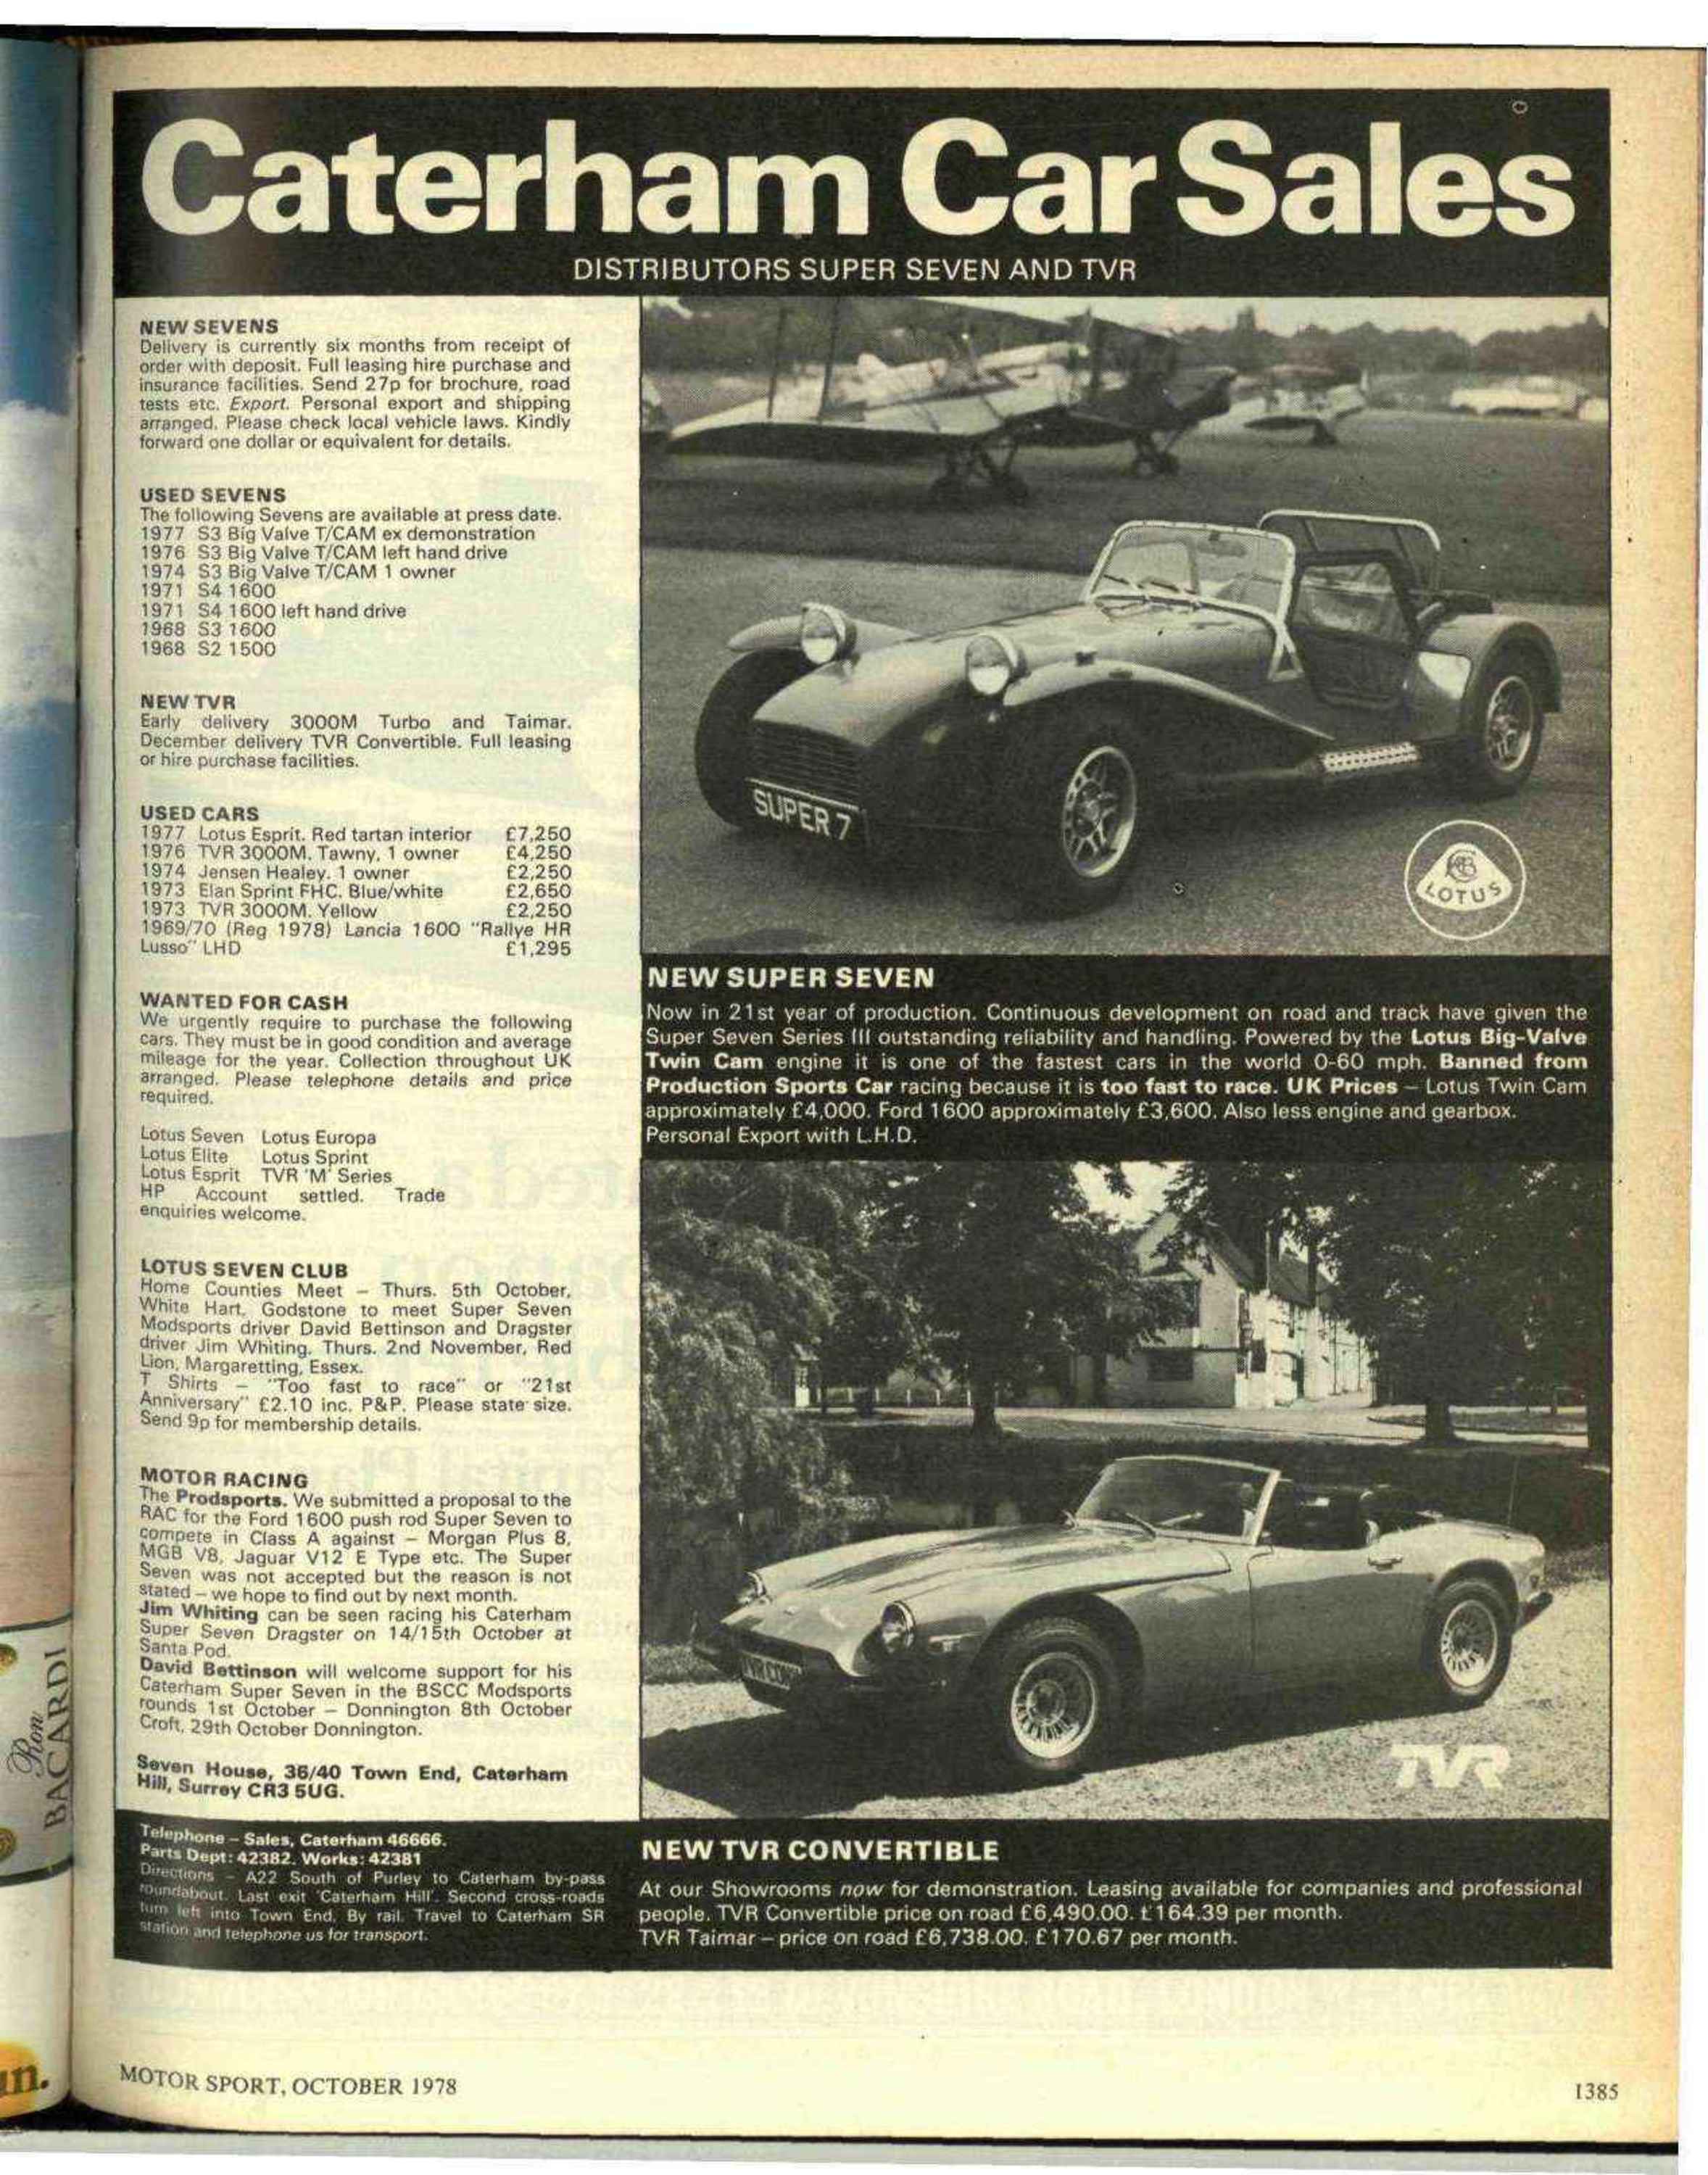 Some fun with a Lister Jaguar October 1978 - Motor Sport Magazine